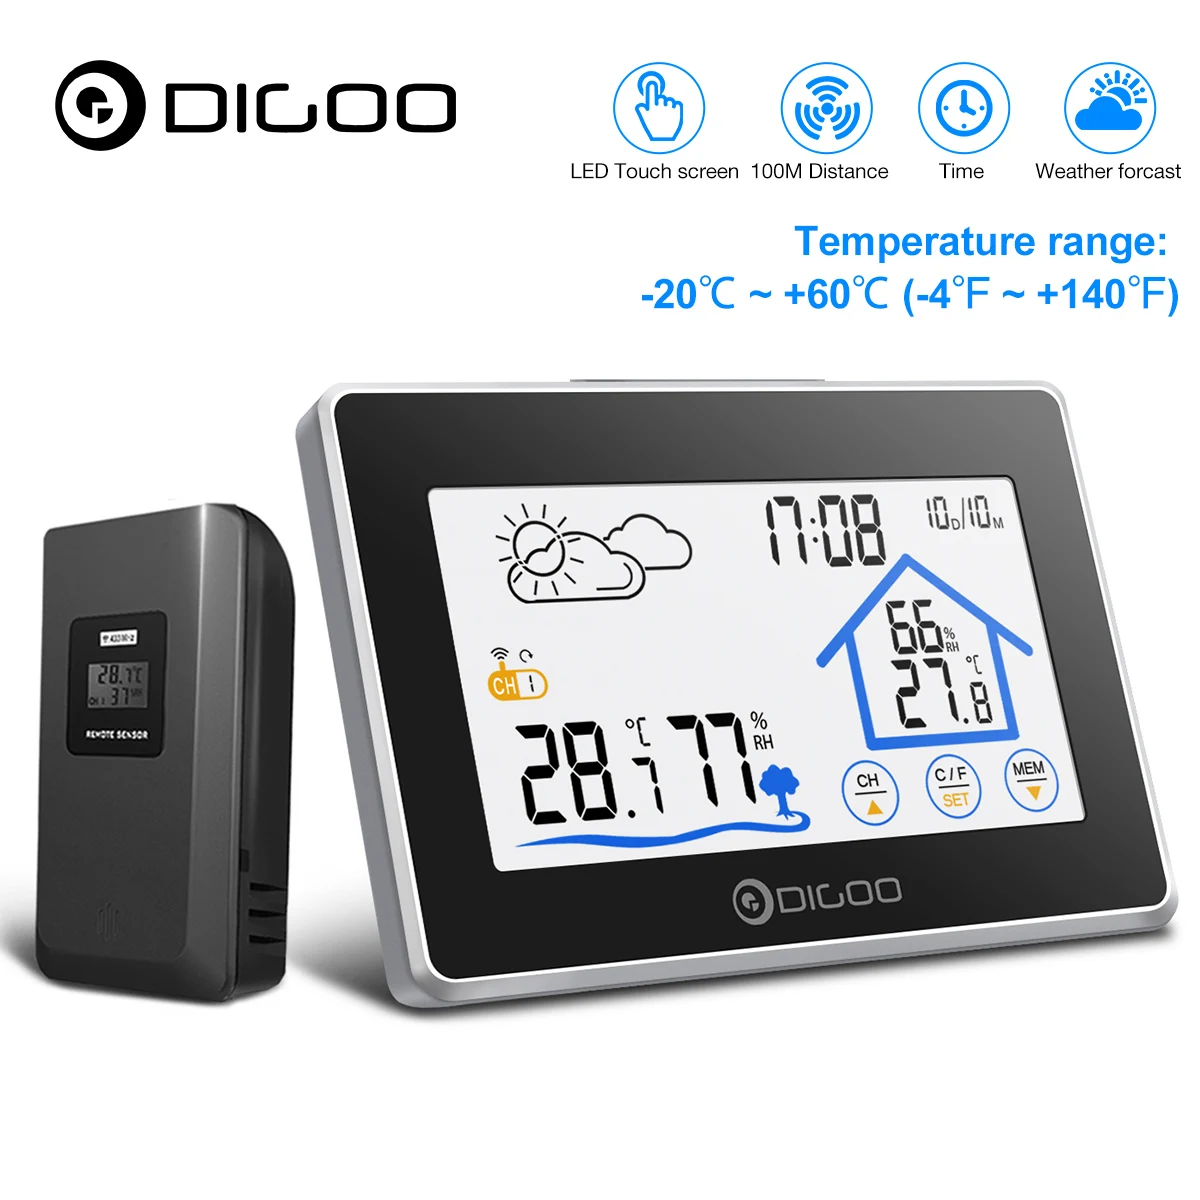 

Digoo DG-TH8380 Indoor Outdoor Wireless Touch Weather Station Forecast Sensor Thermometer Hygrometer Meter Calendar Backlight